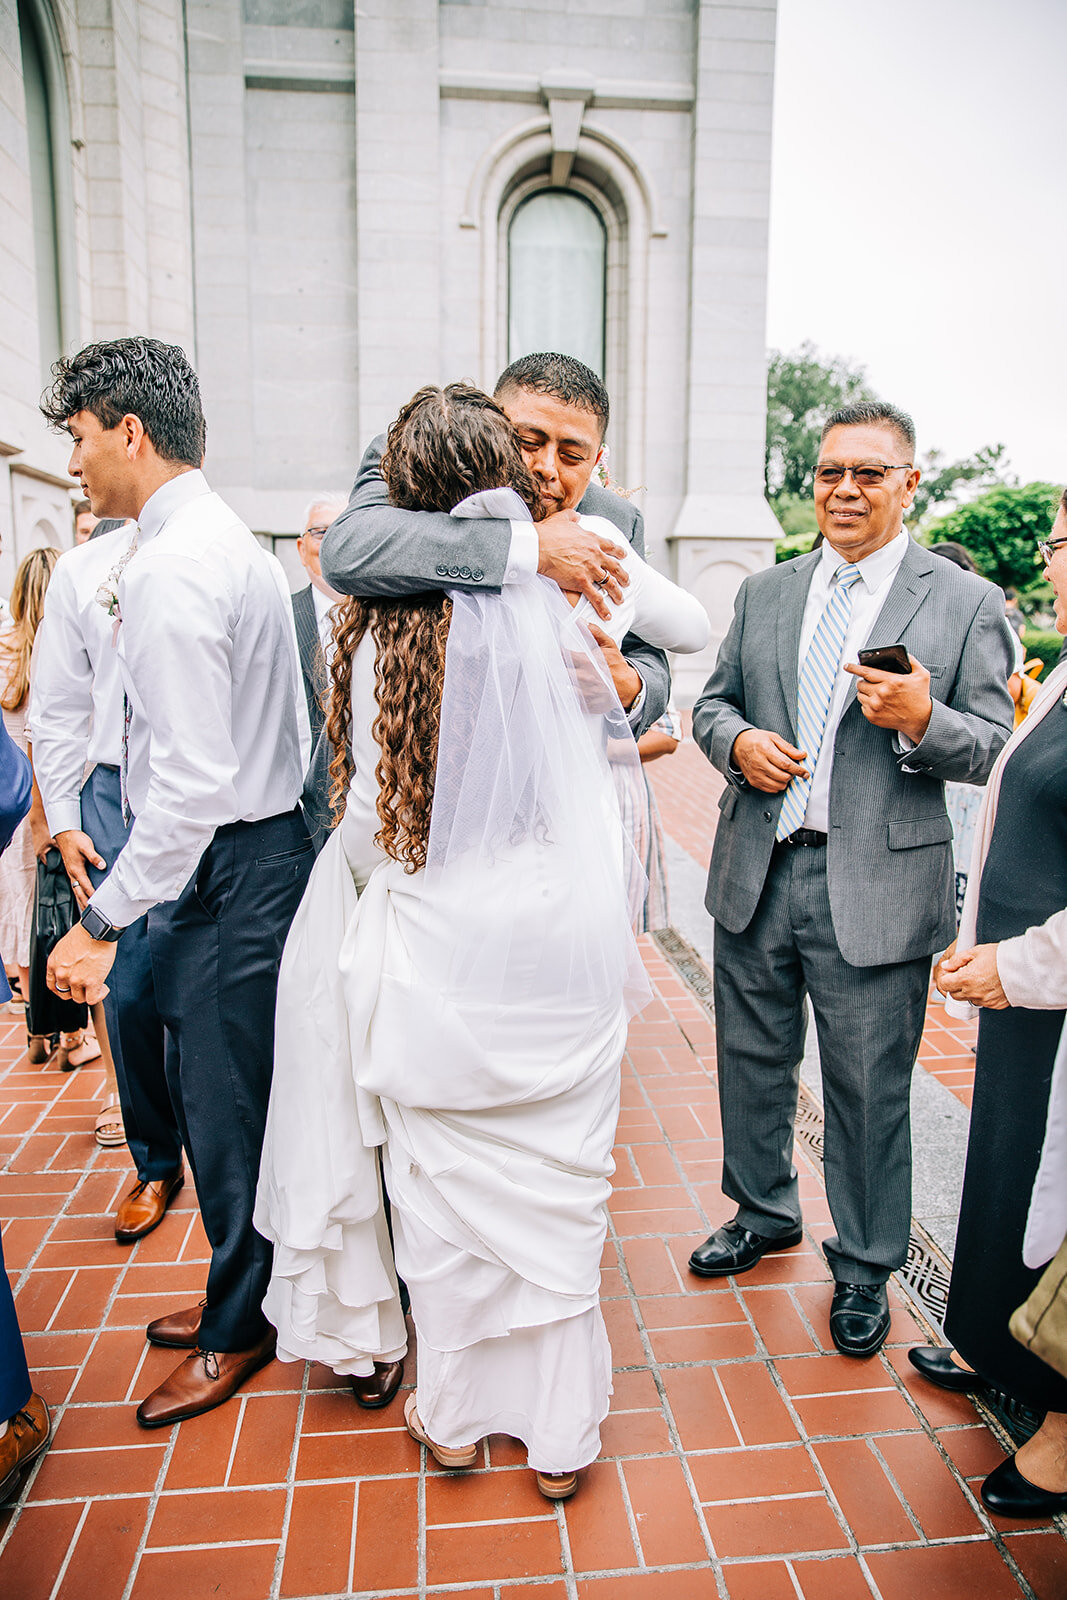  salt lake city wedding bride hugging her father outside the salt lake city lds temple square professional utah wedding photographer temple exit friends and family at wedding long veil lds couple lds bride bella alder photography wedding photographer